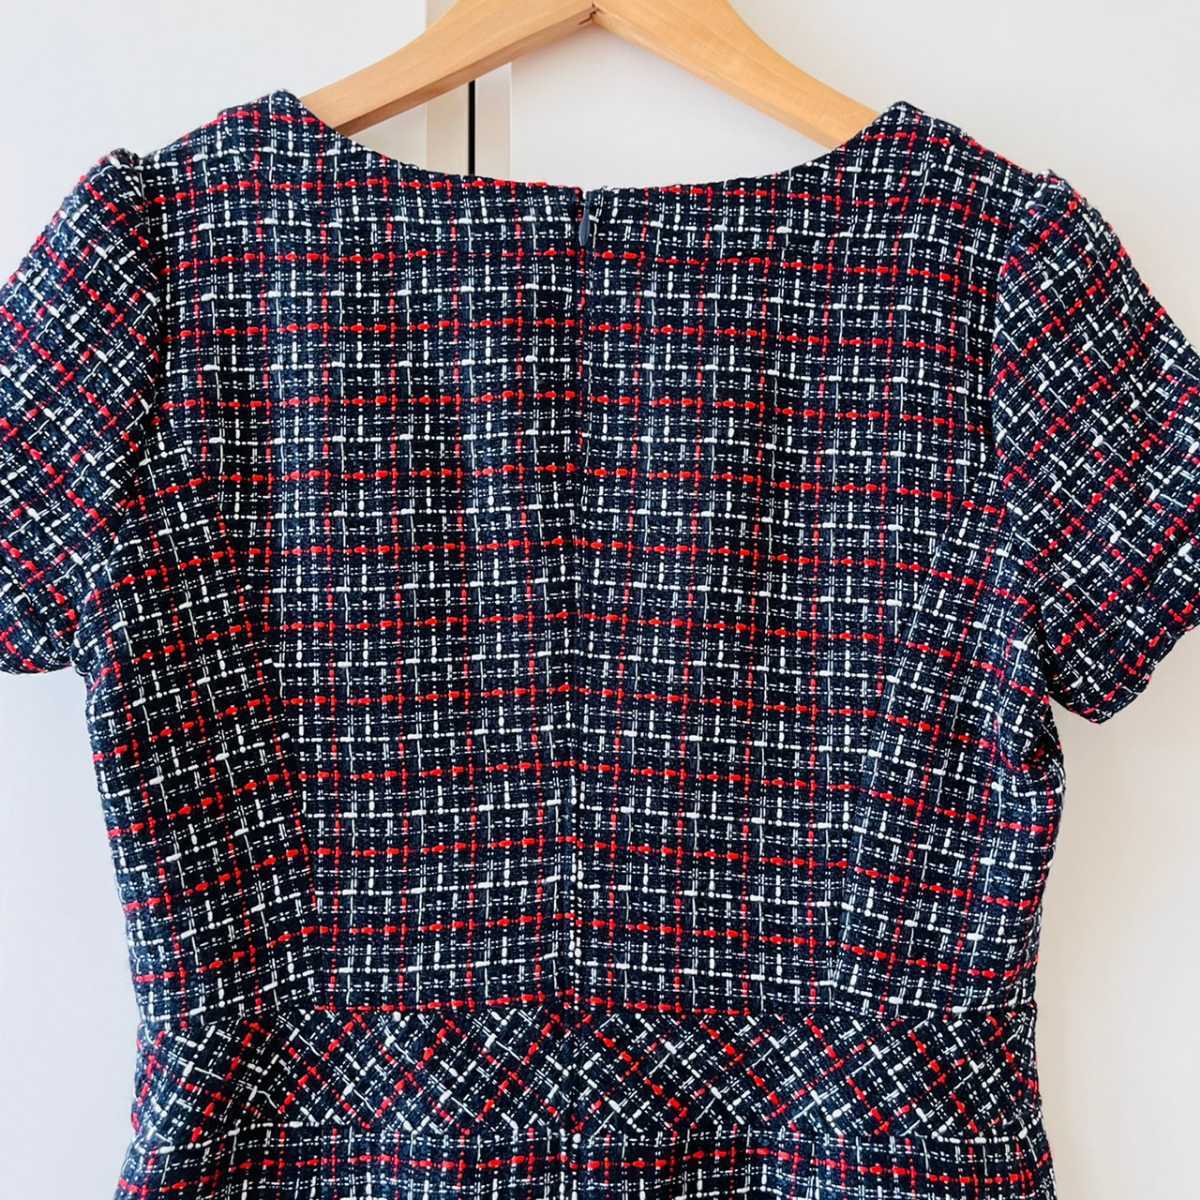 H338cL{NATURAL BEAUTY BASIC Natural Beauty Basic } size S short sleeves tweed One-piece navy check pattern lady's 